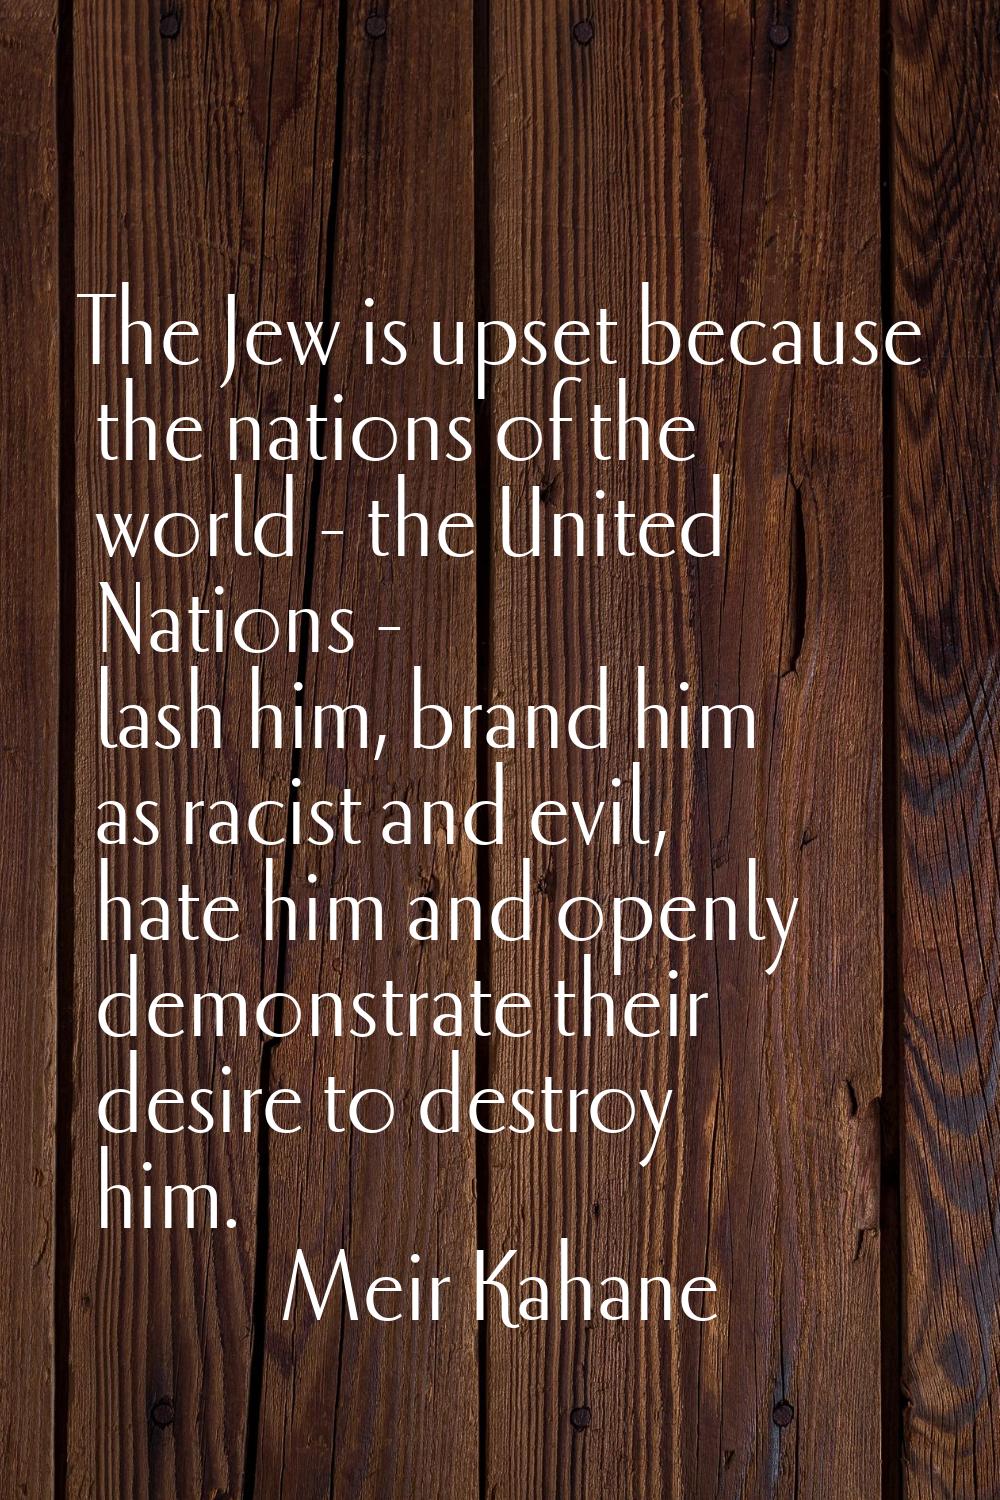 The Jew is upset because the nations of the world - the United Nations - lash him, brand him as rac